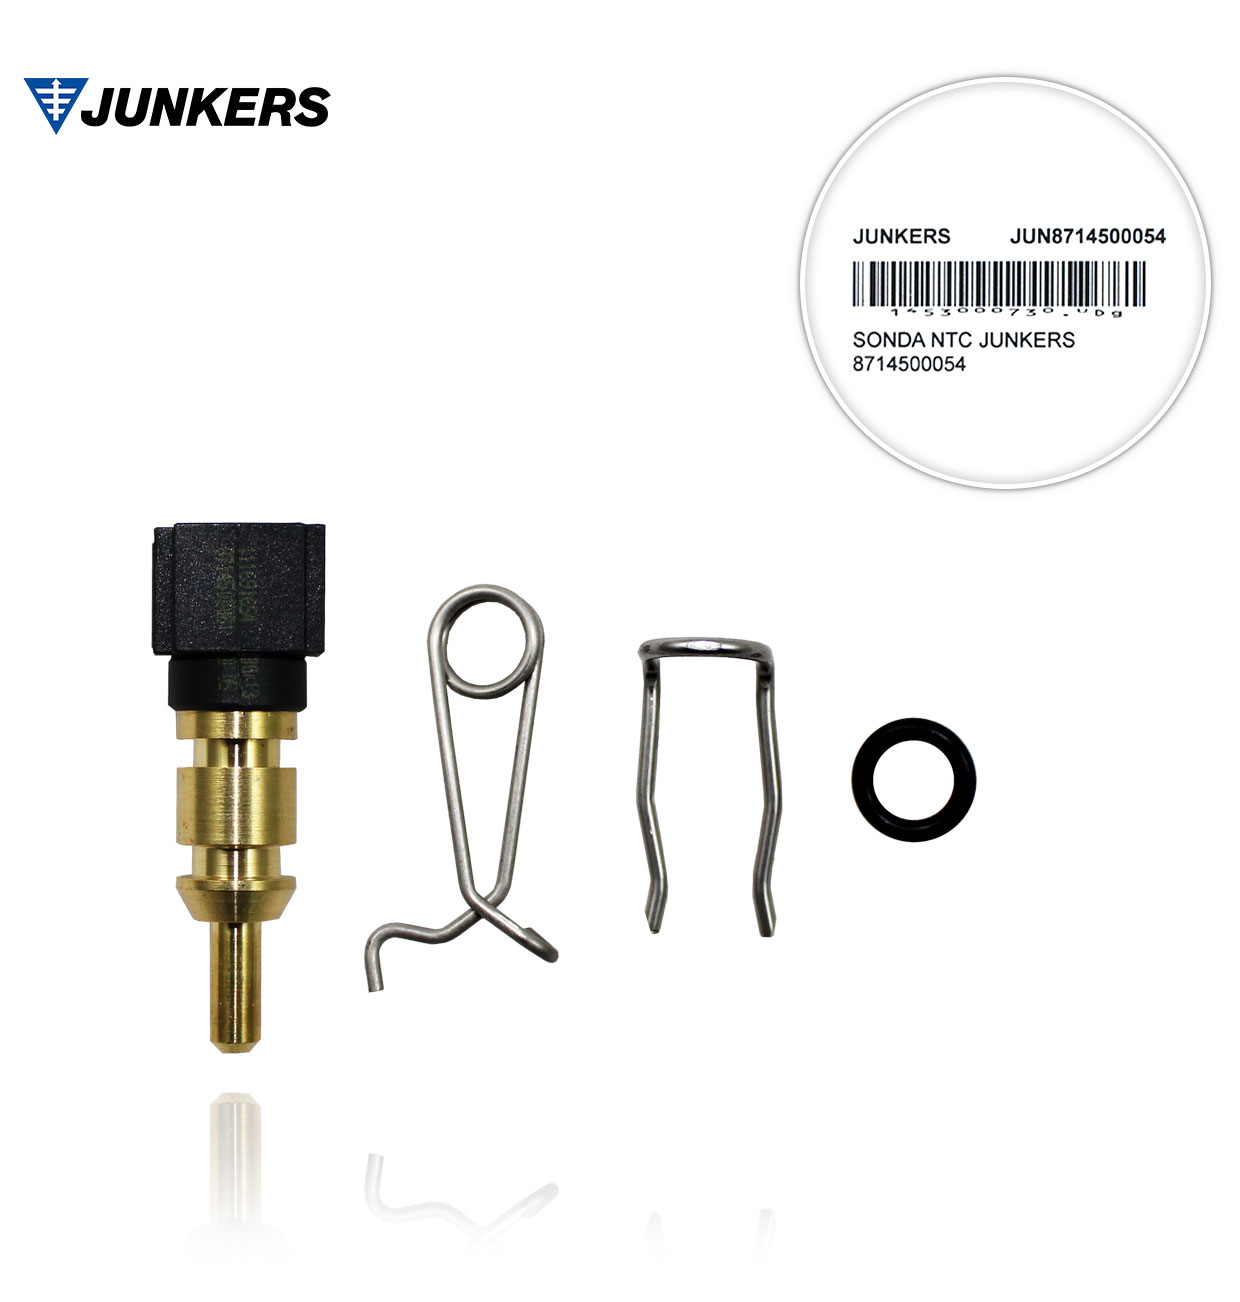 JUNKERS 8714500054 DHW NTC TEMPERATURE PROBE